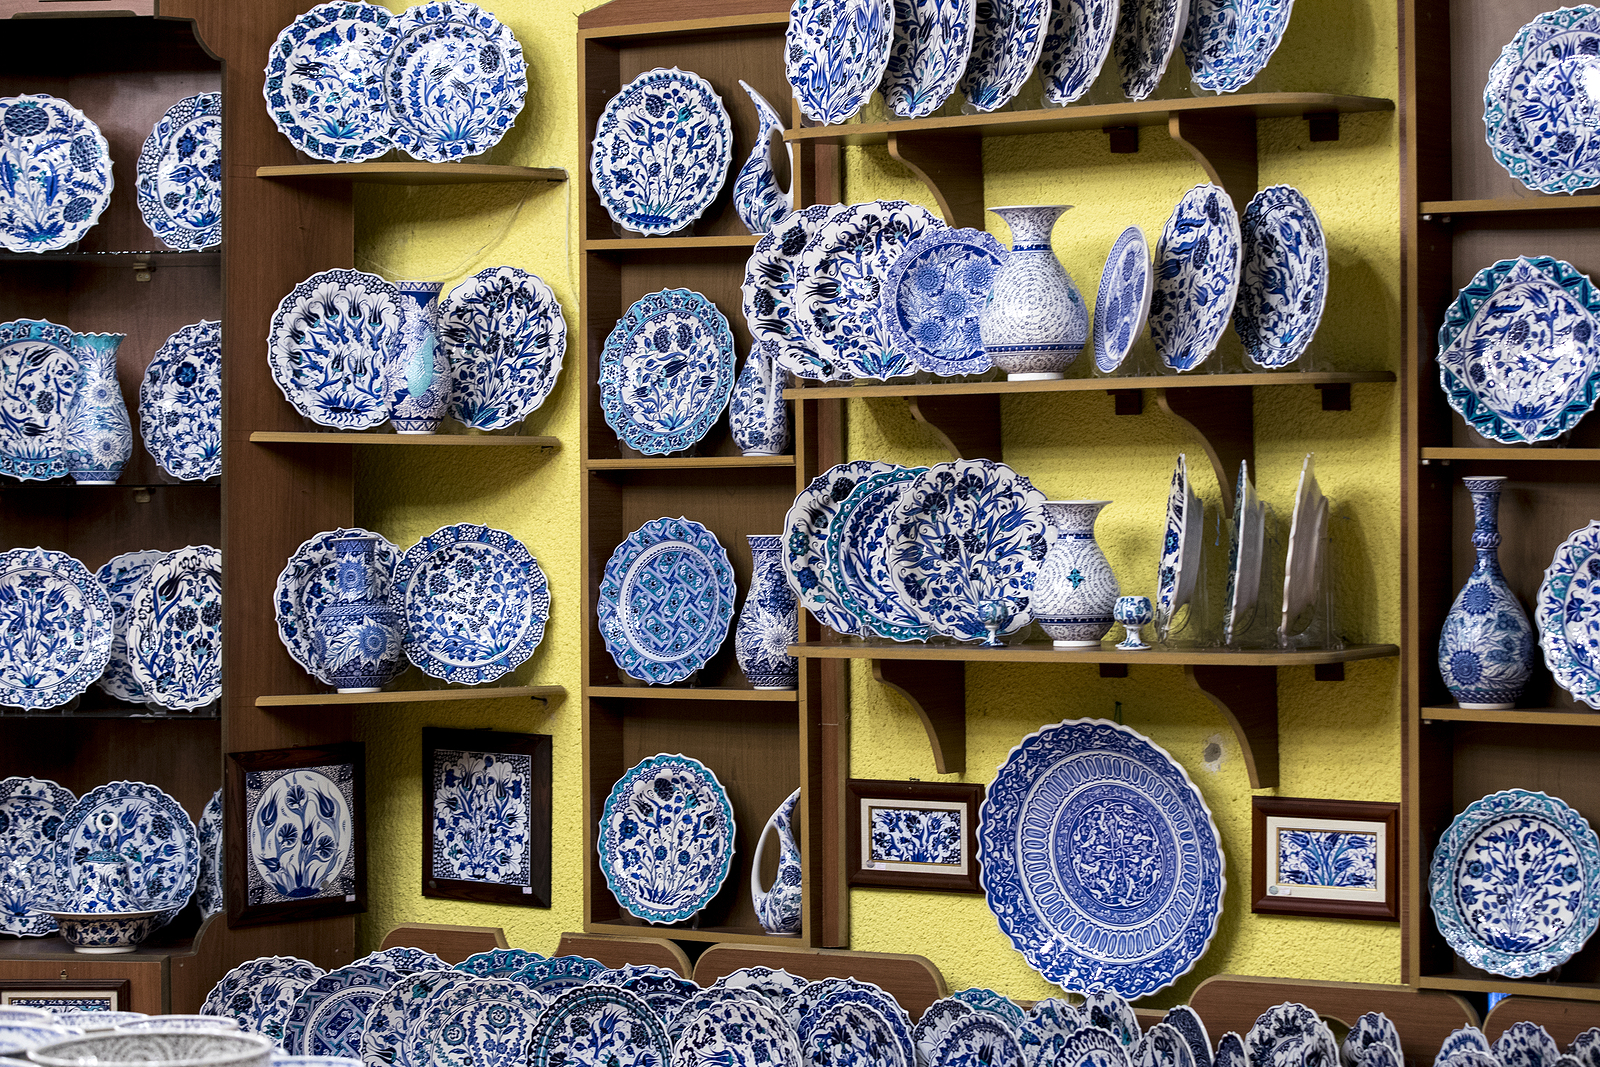 5 Helpful Tips on How to Collect Ceramics